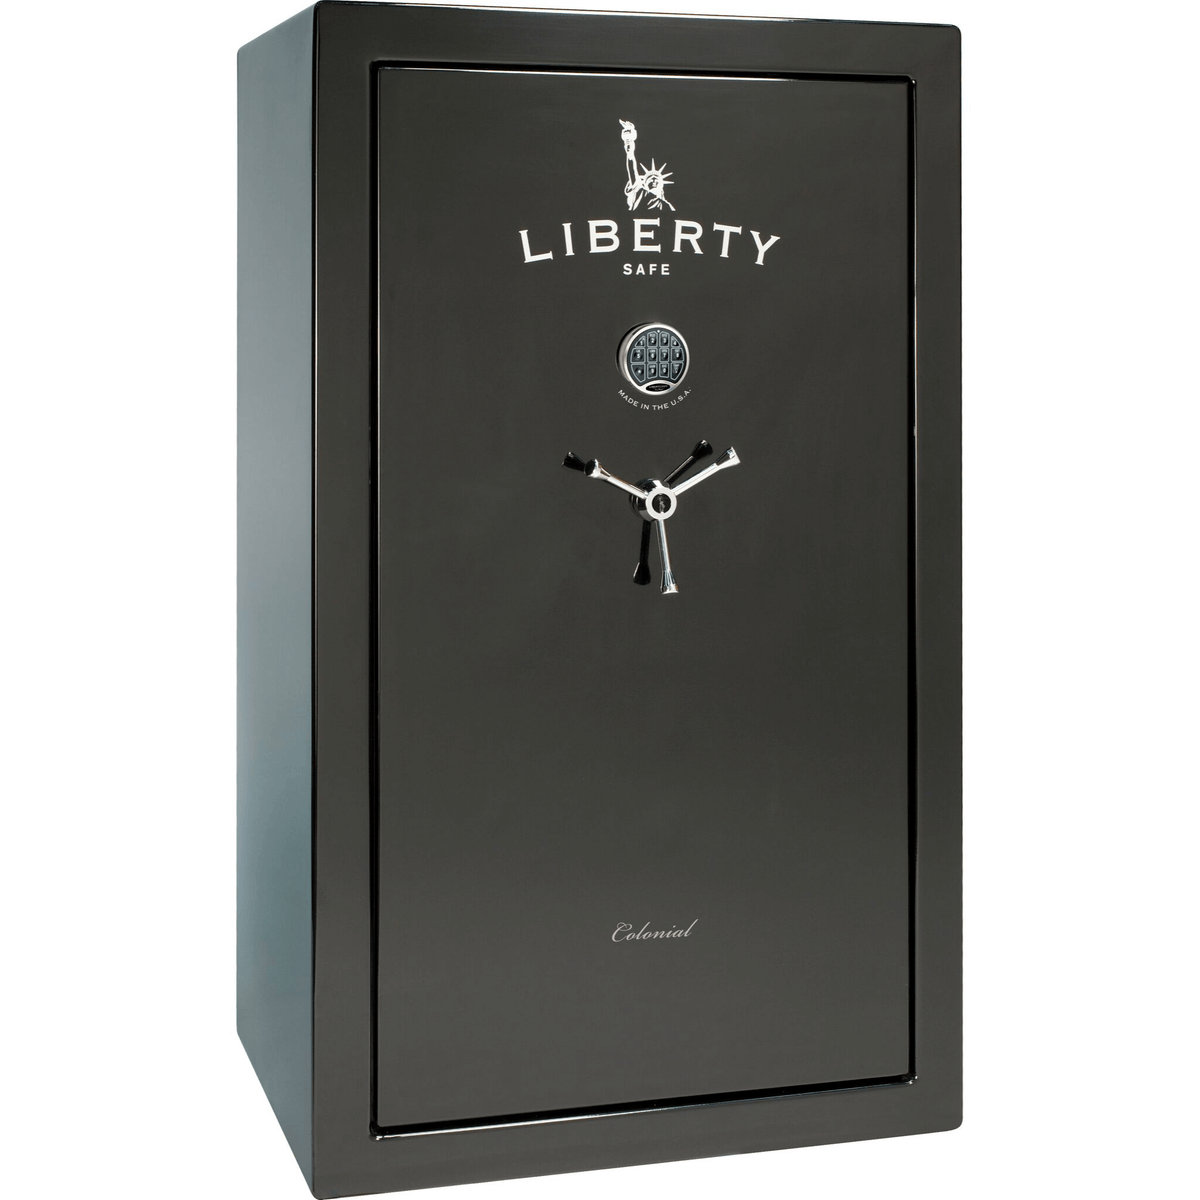 Liberty Colonial 30 Safe in Black Gloss with Chrome Electronic Lock.